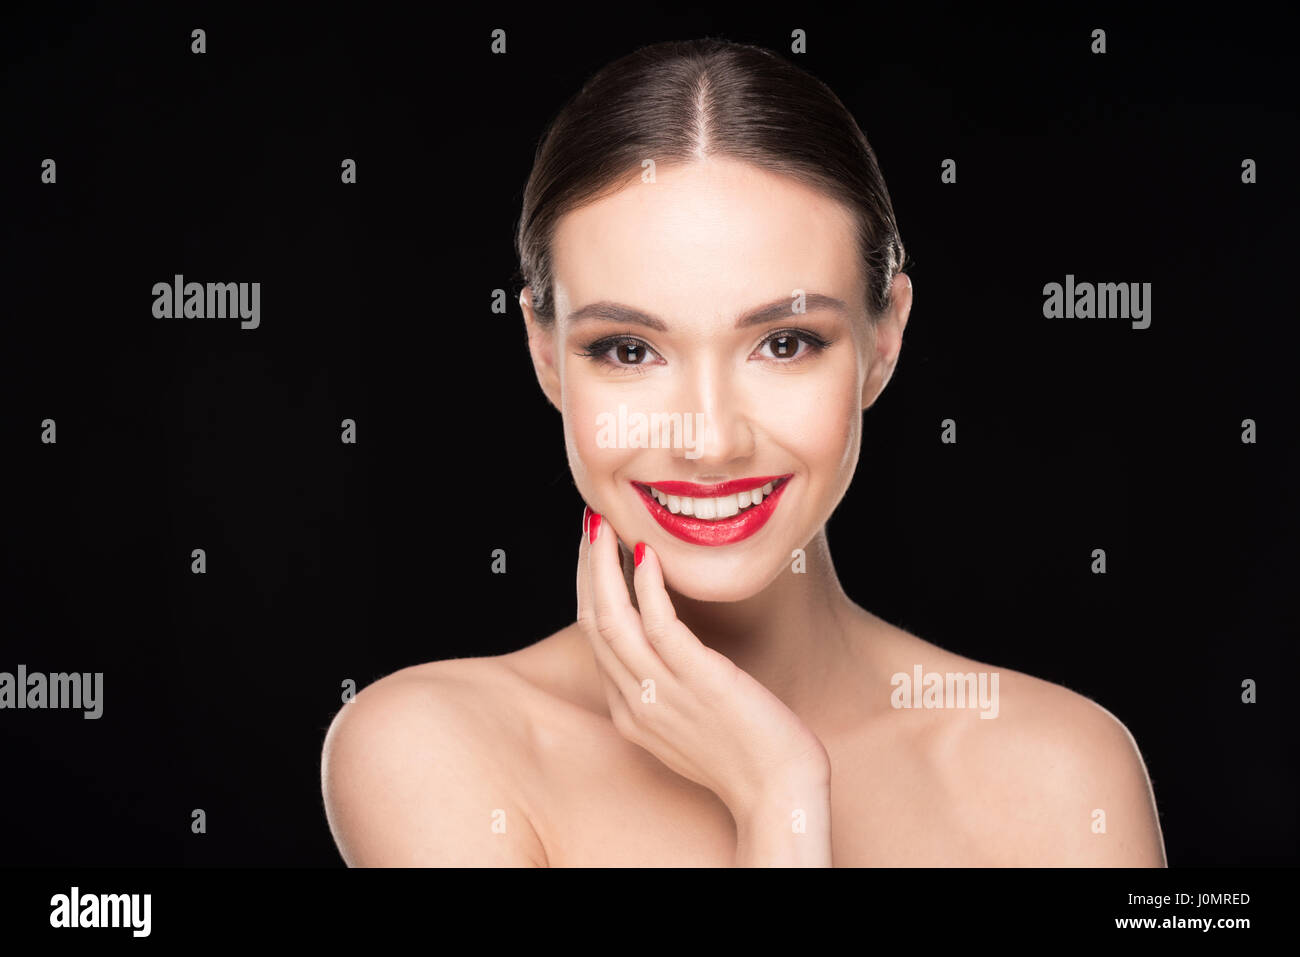 Portrait of pretty young brunette woman with red lips smiling at camera Stock Photo